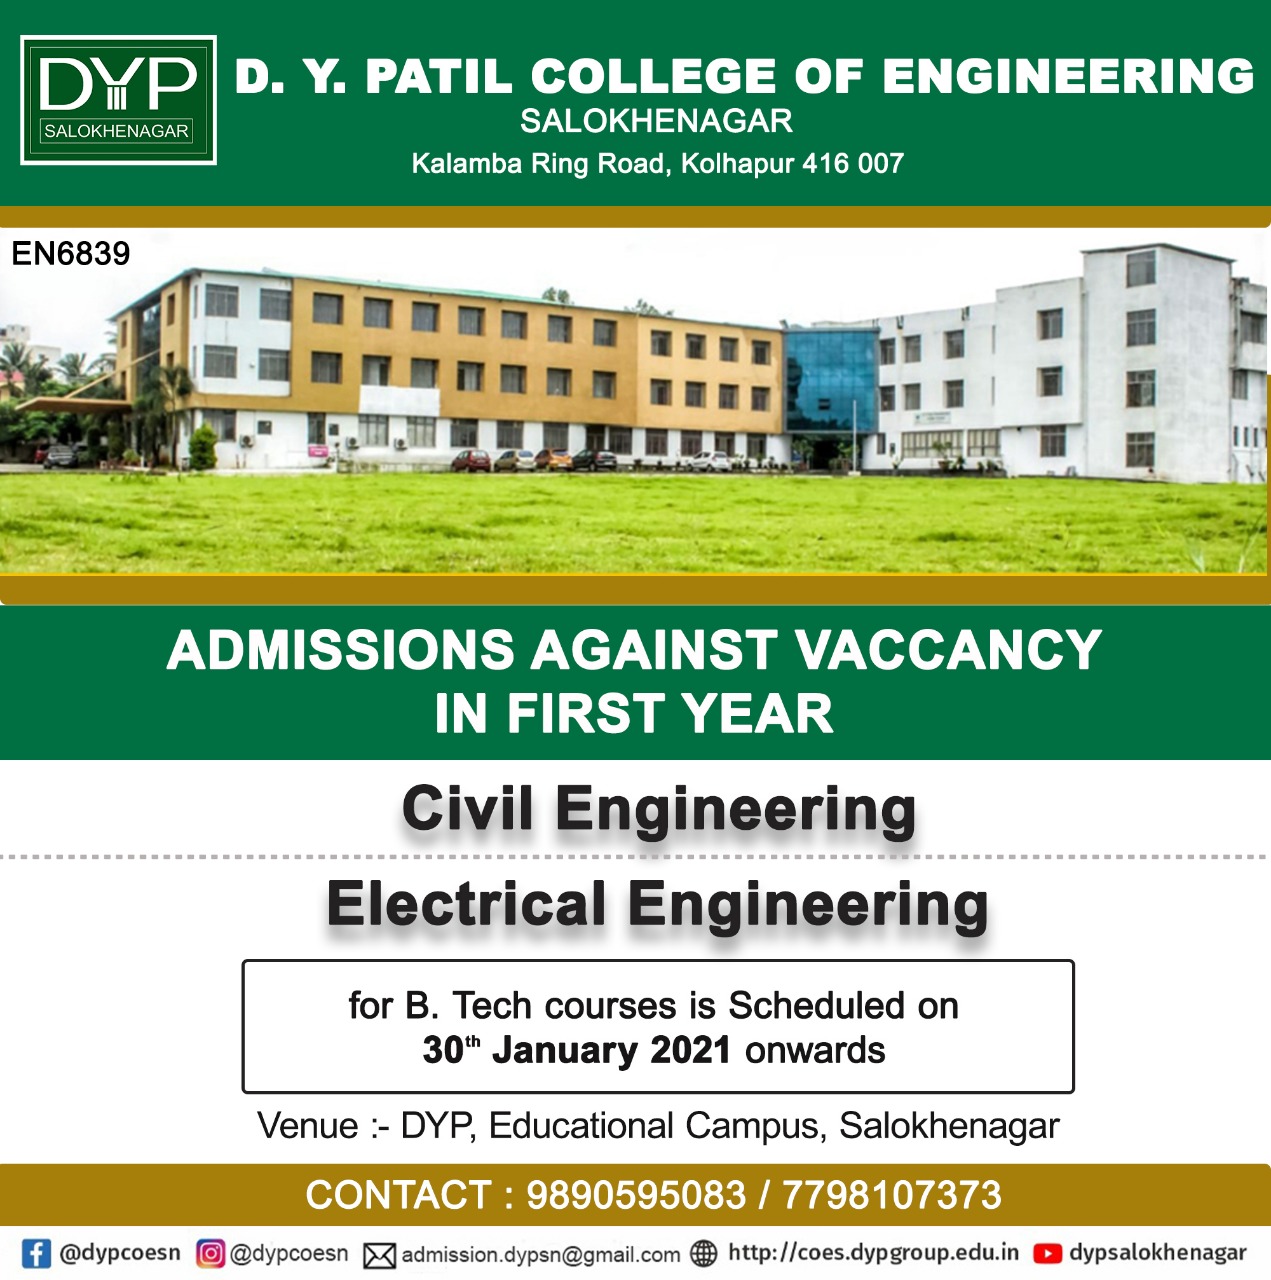 Admission against vacancy for first year